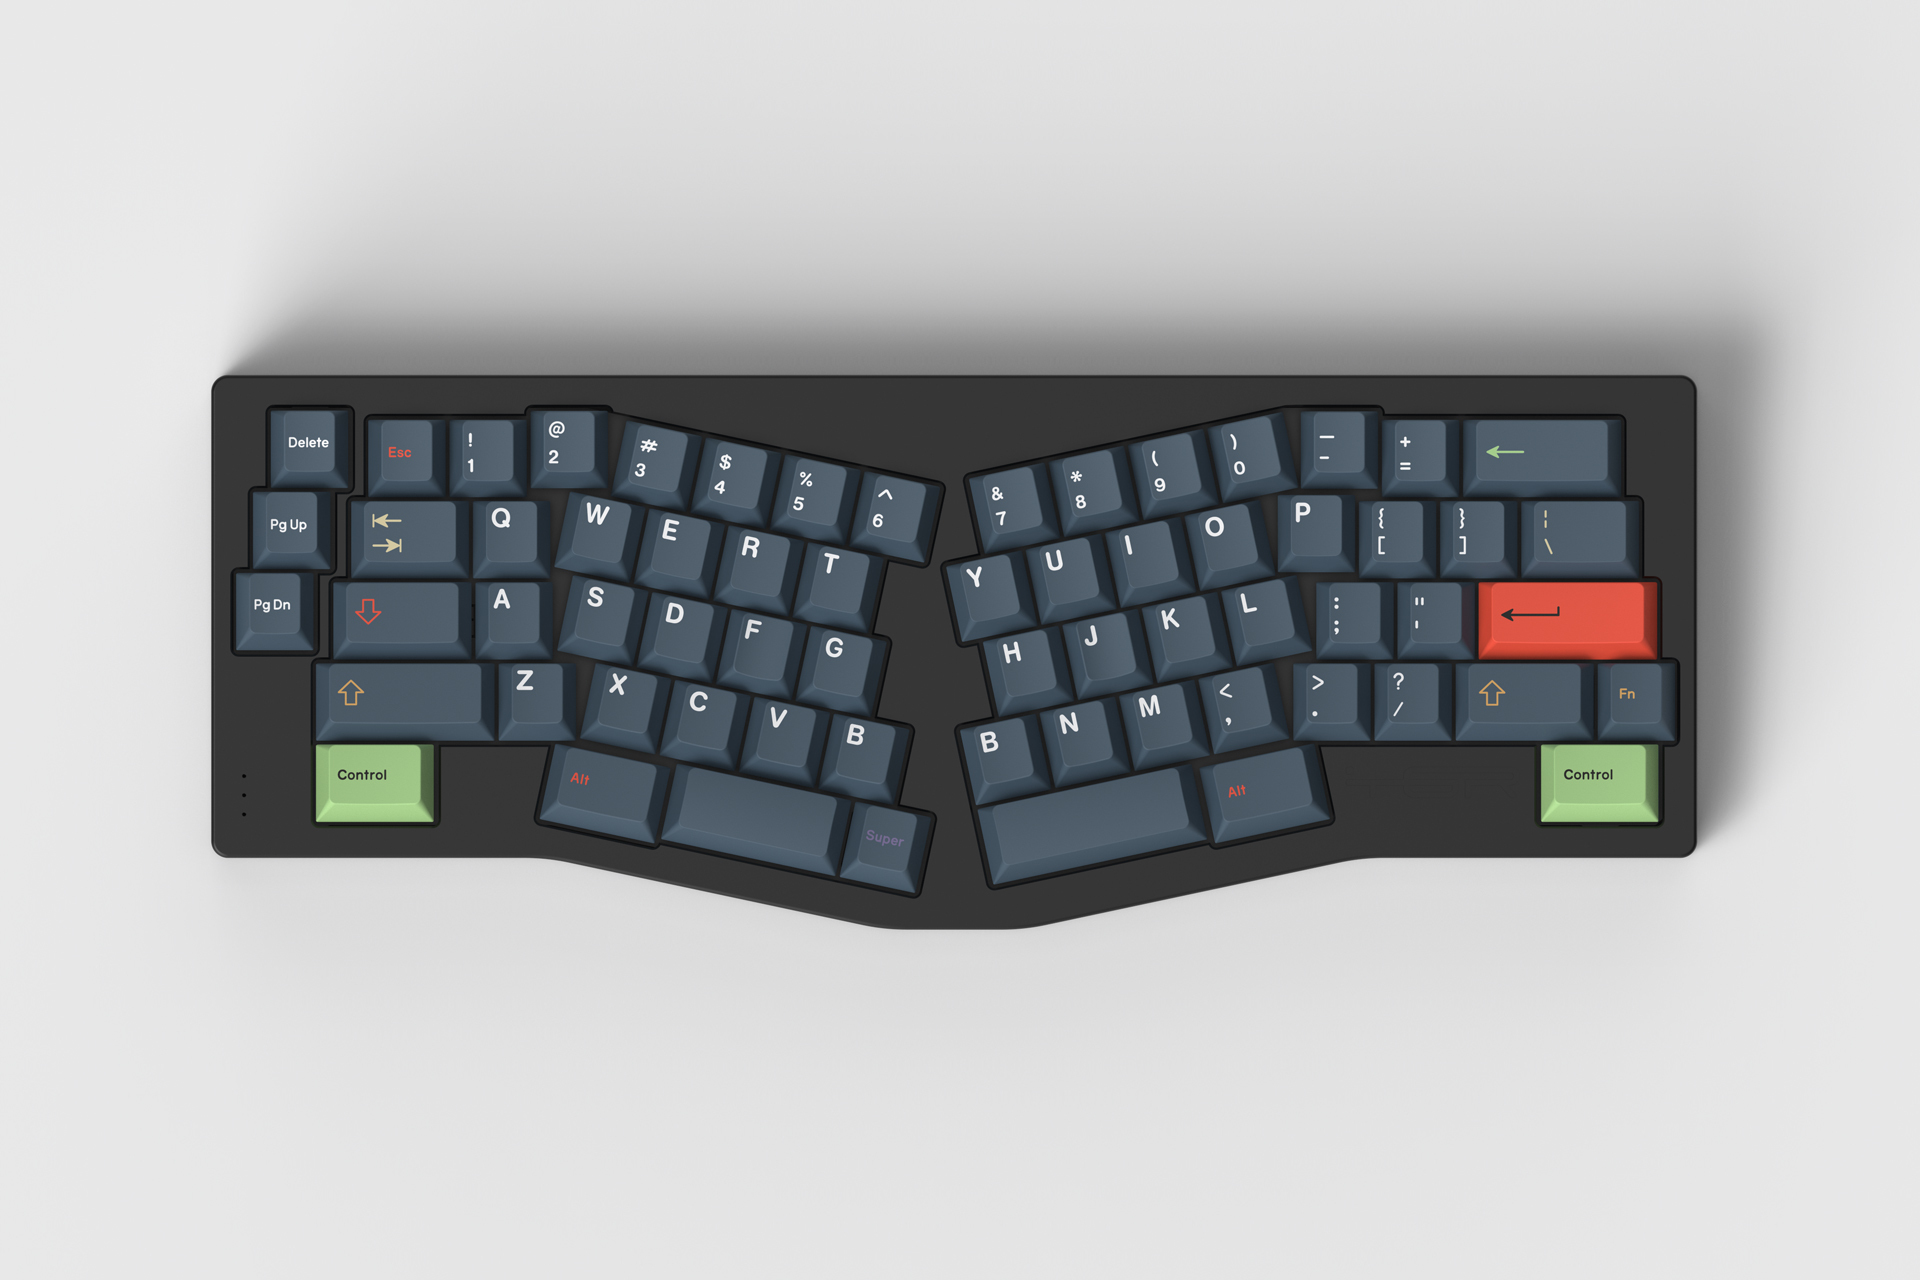 GB Extras] ePBT - Be The One – Rebult Keyboards